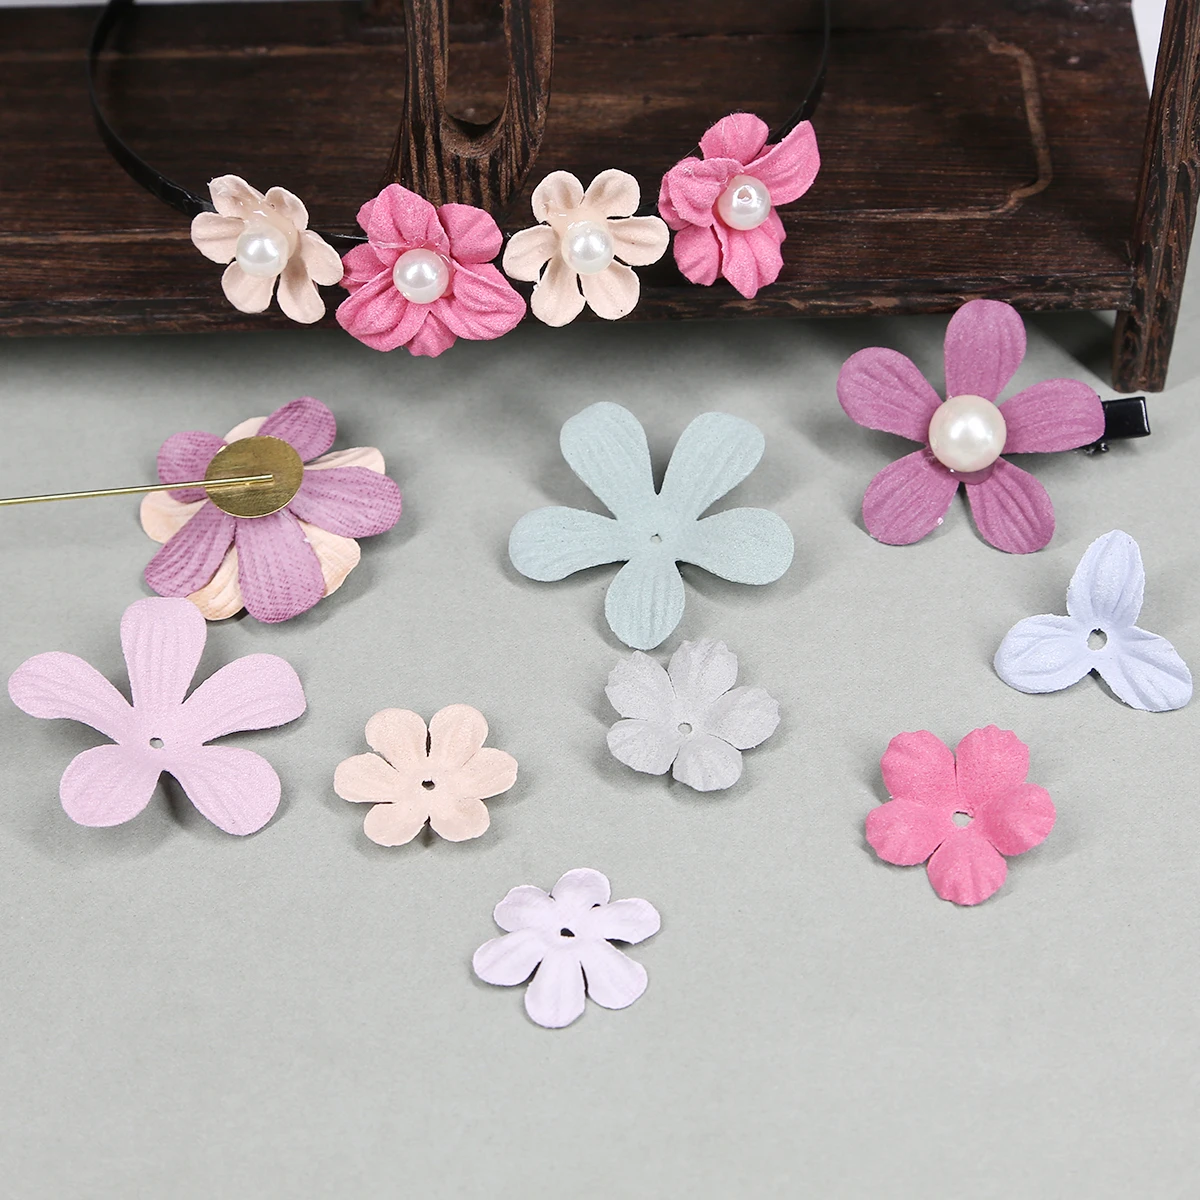 30Pcs Small Exquisite Leather Flowers Head Handmade Artificial Wedding Floral 